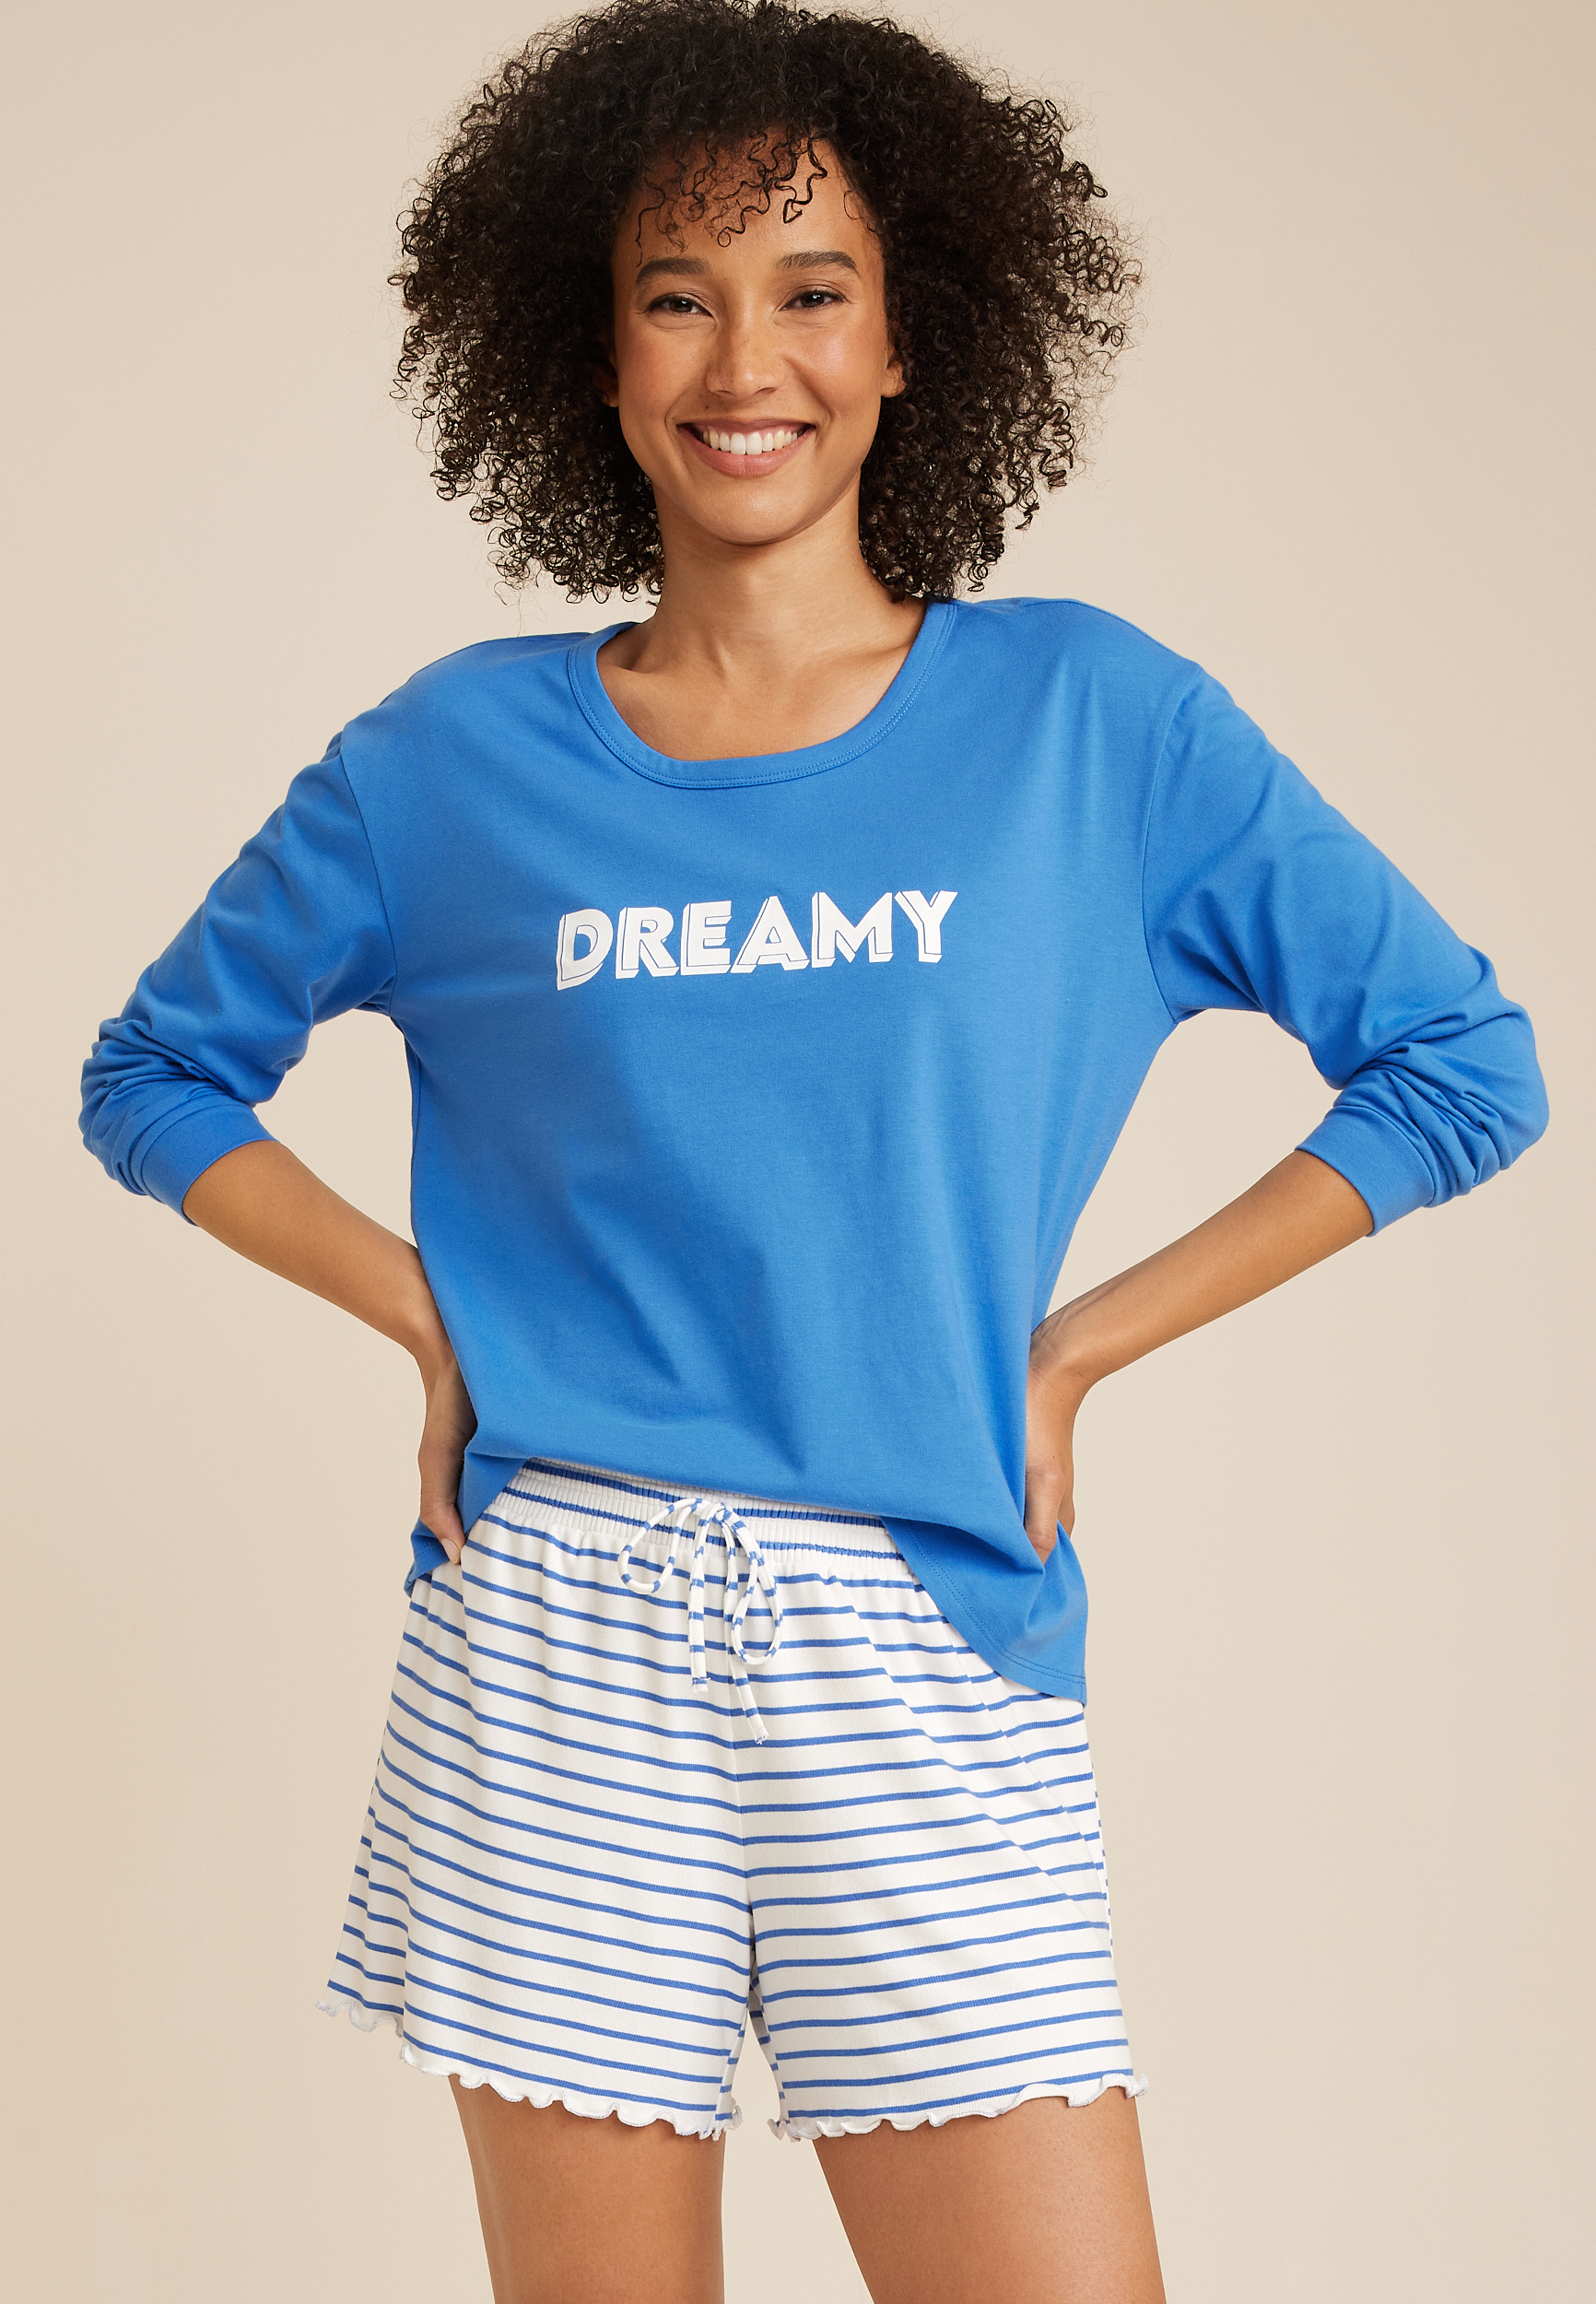 Dreamy Graphic Tee And Striped Short Pajama Set | maurices